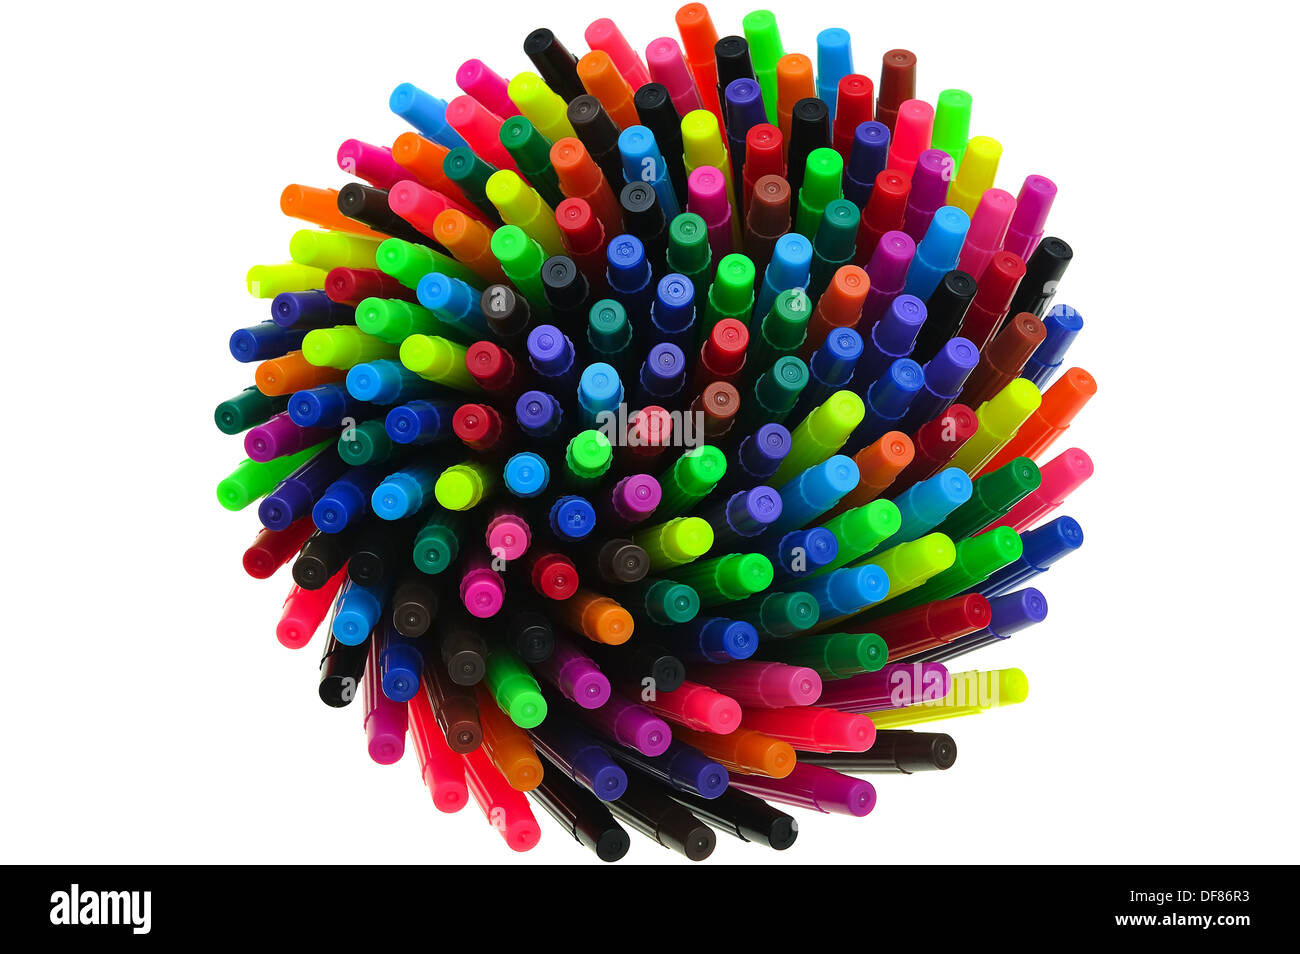 Aerial View of Colorful felt-tip pens Stock Photo